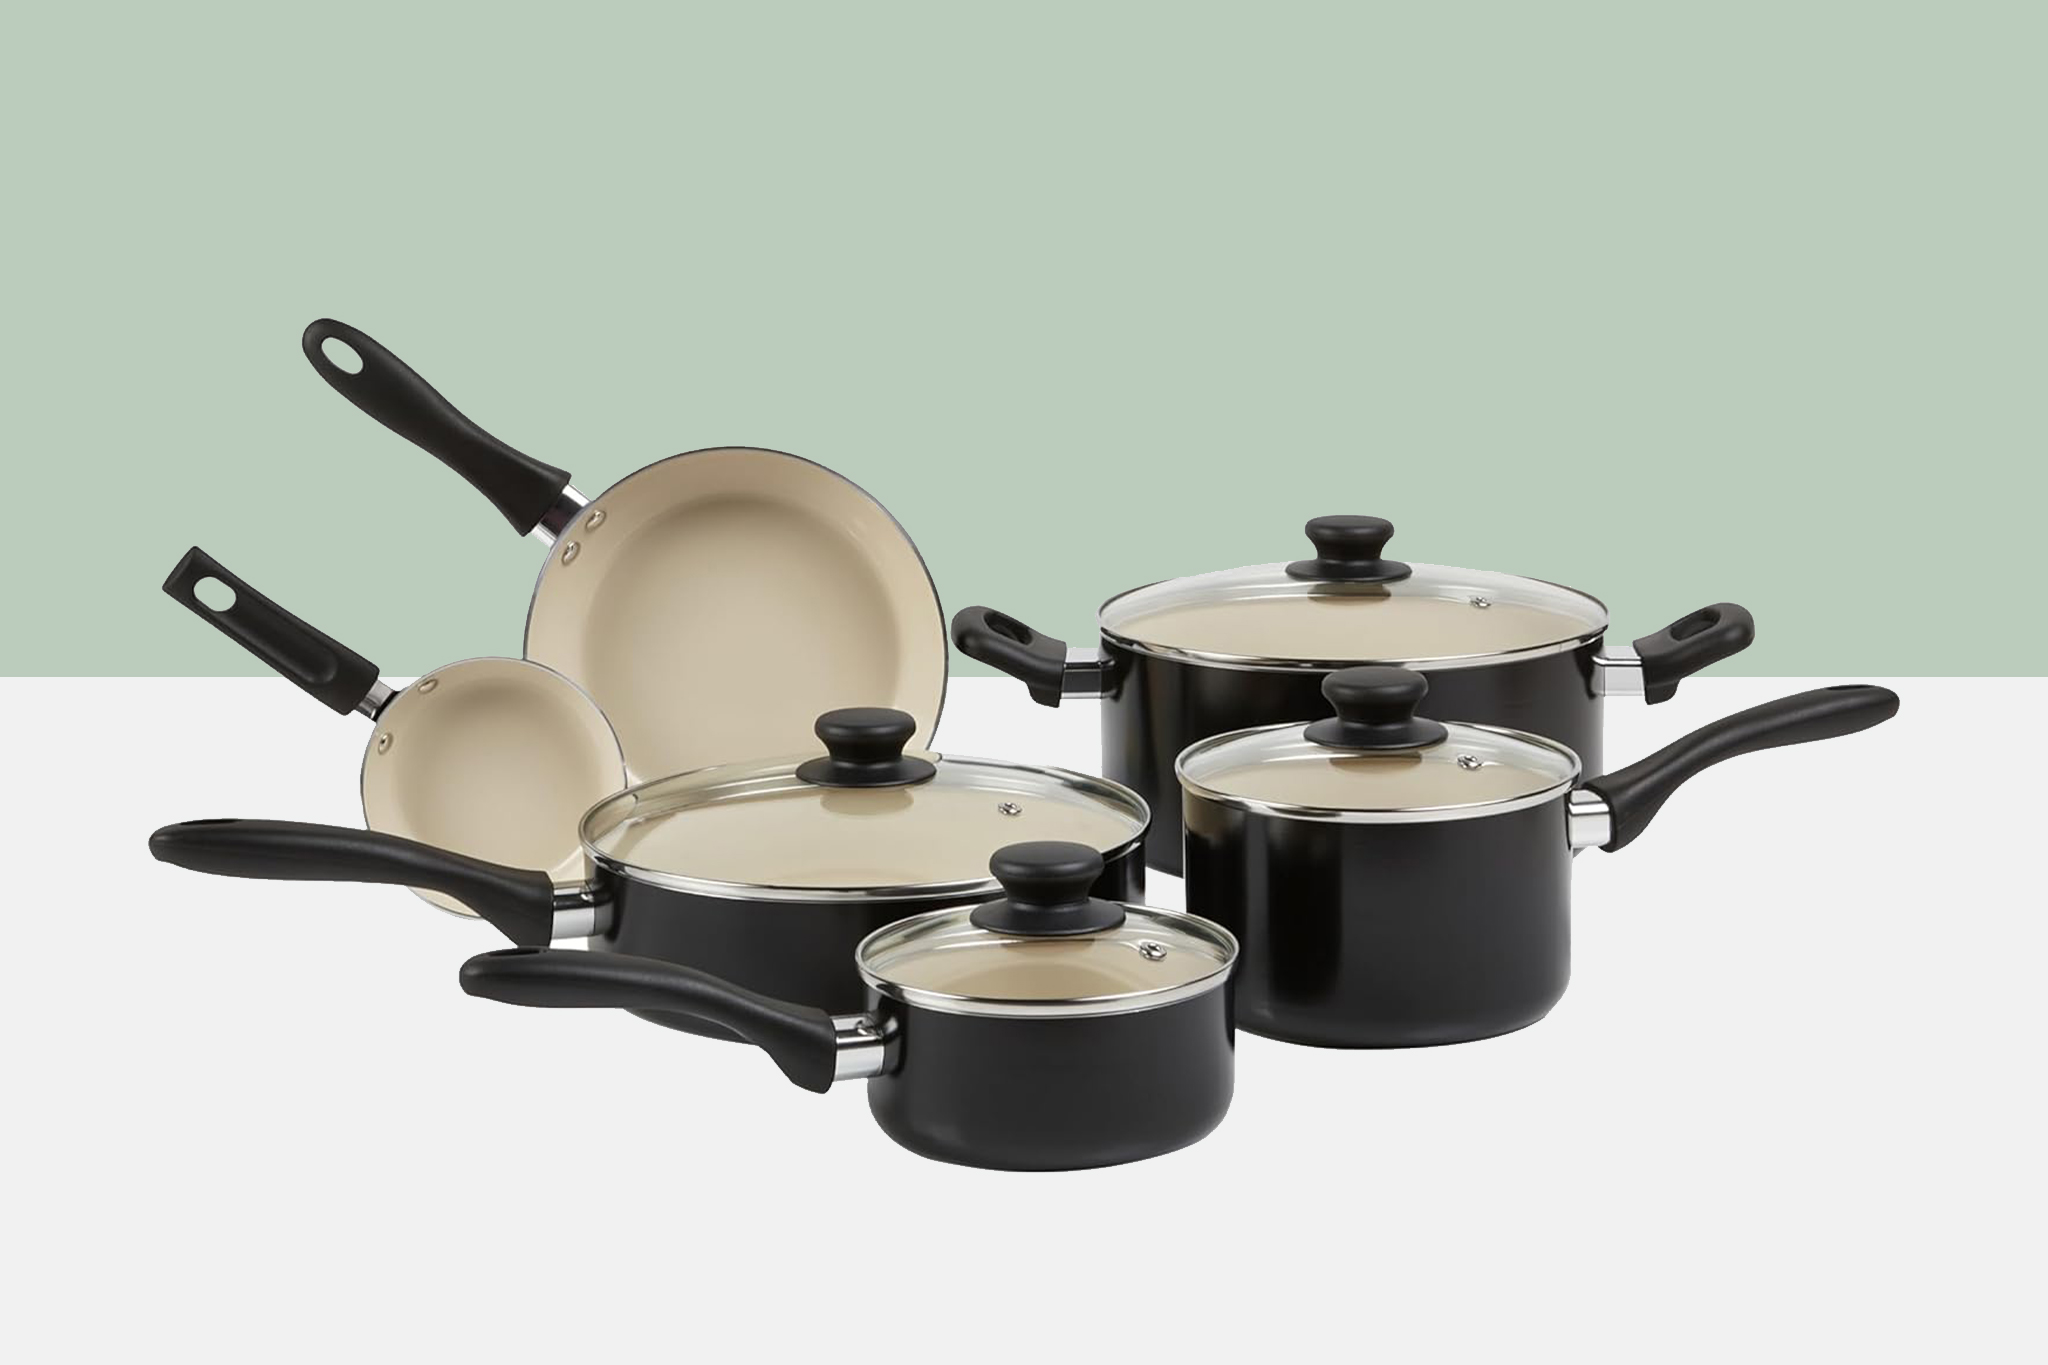 Our honest review of Amazon Basics’ new ceramic cookware set